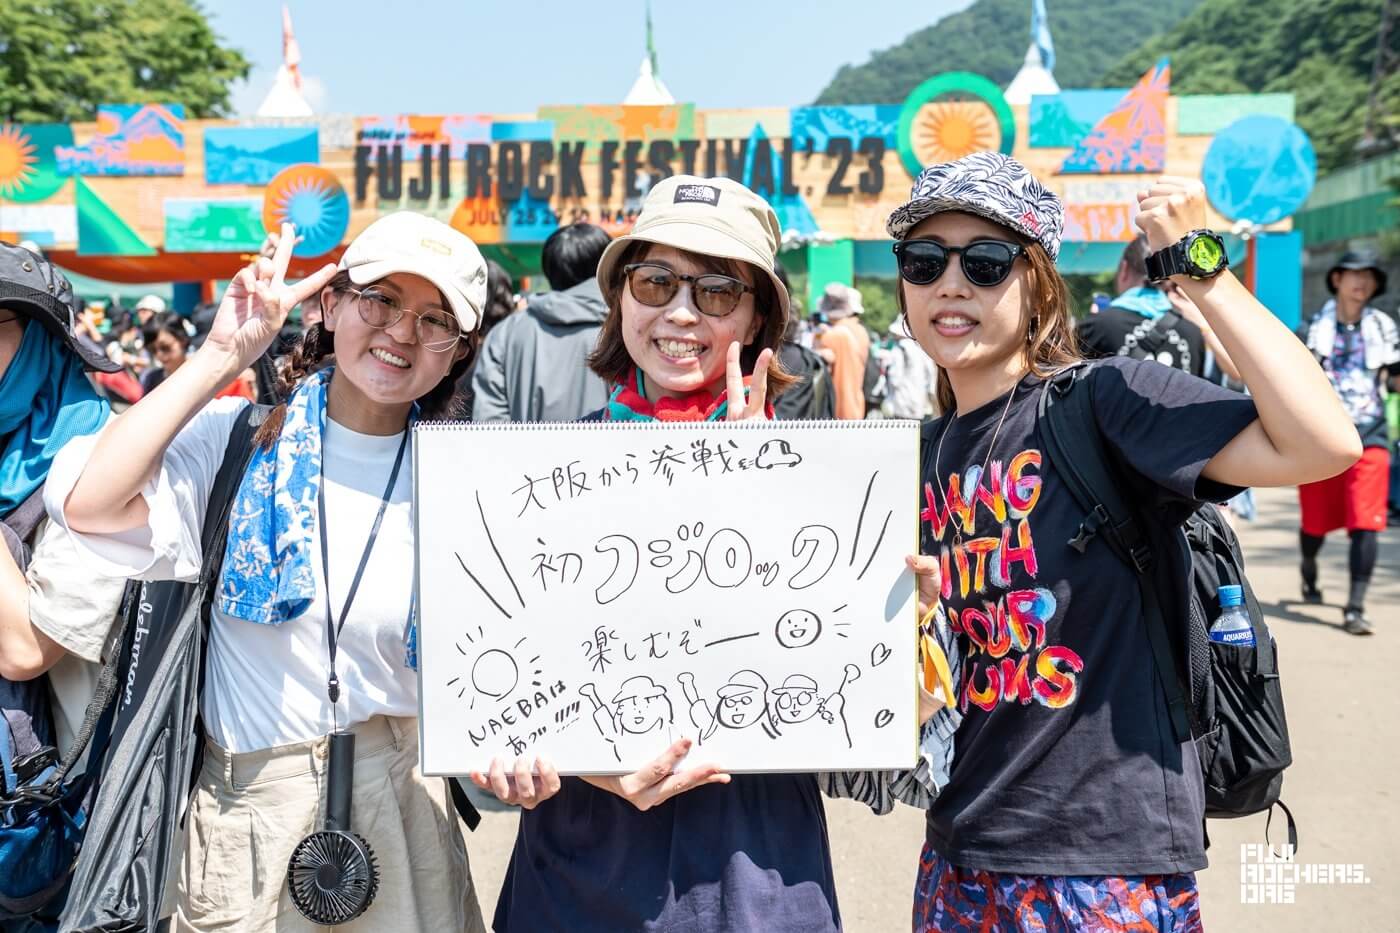 Message for FUJI ROCK! #06